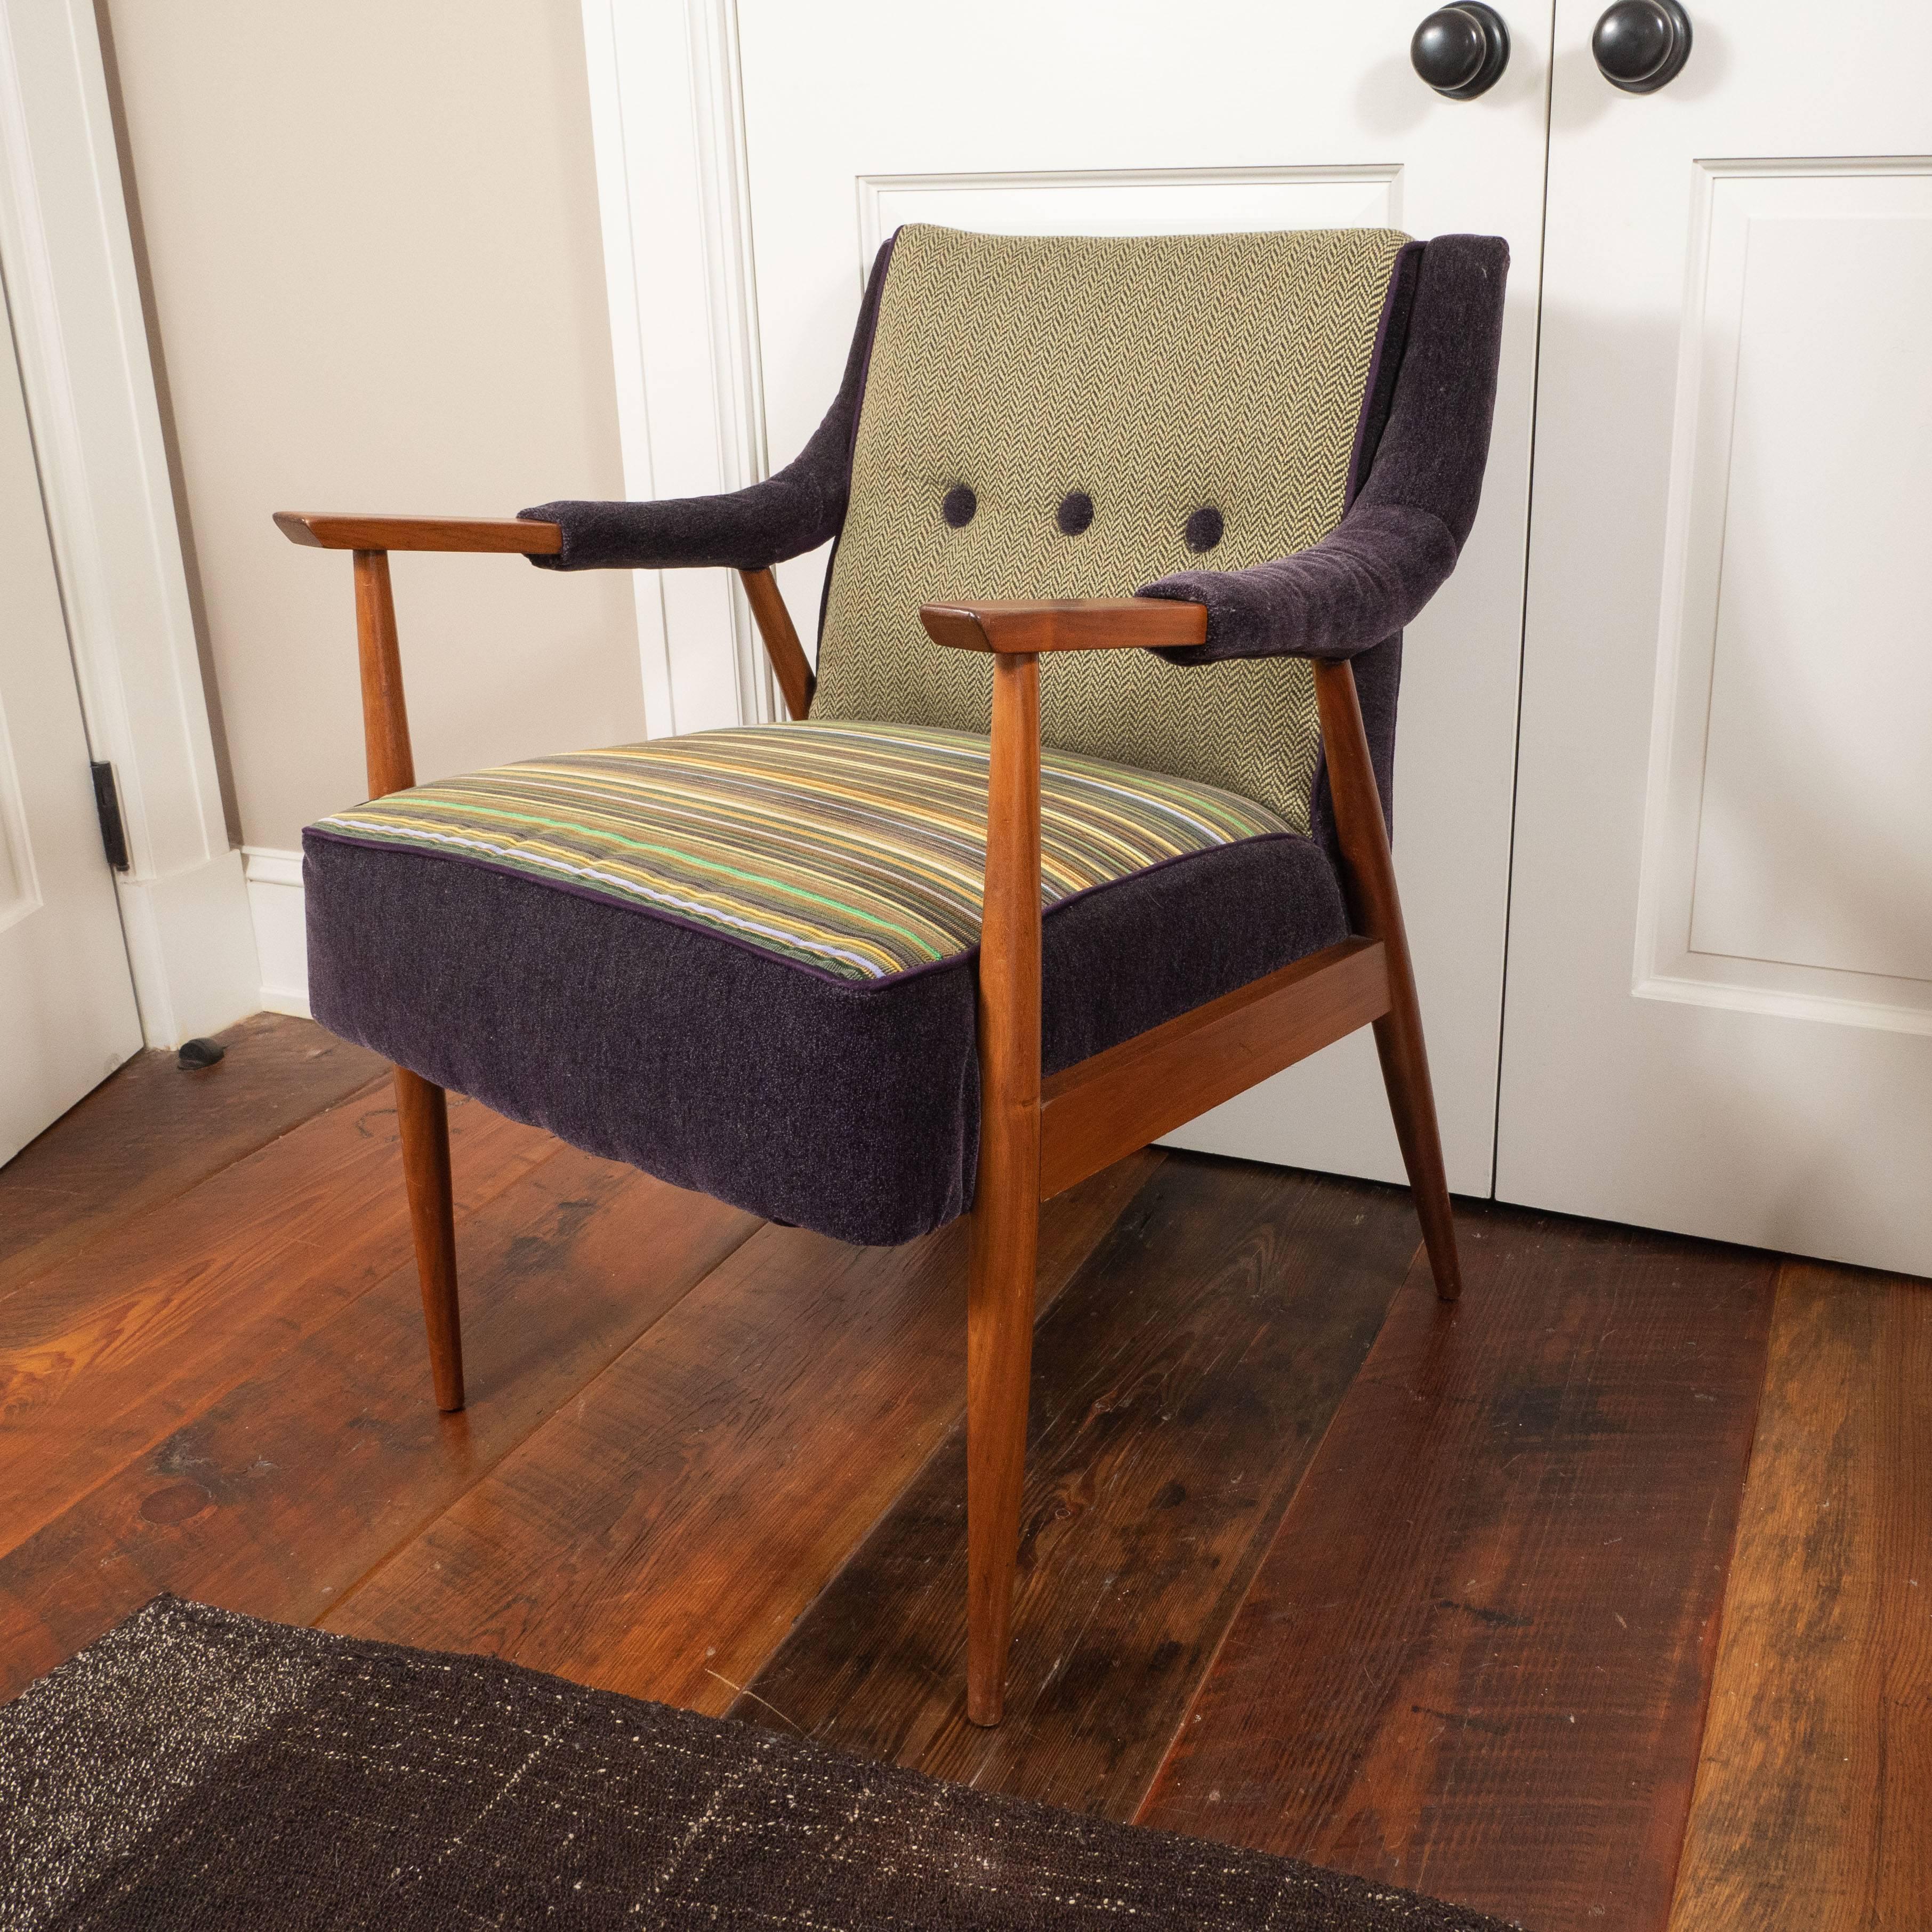 American Midcentury Chair and Footstool with New Upholstery